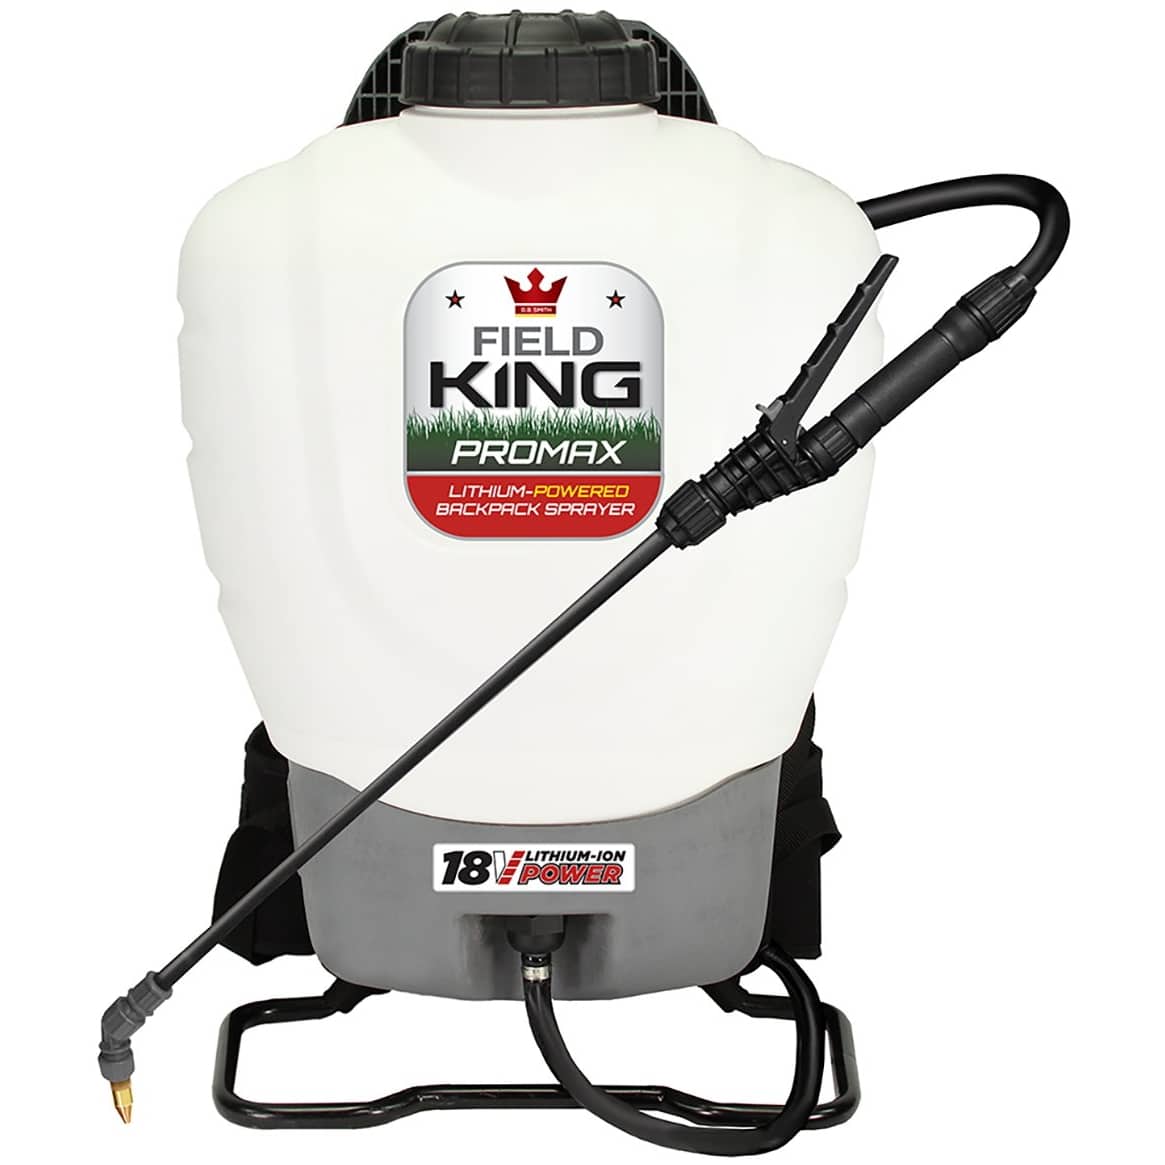 Field King Professionals Backpack Sprayer